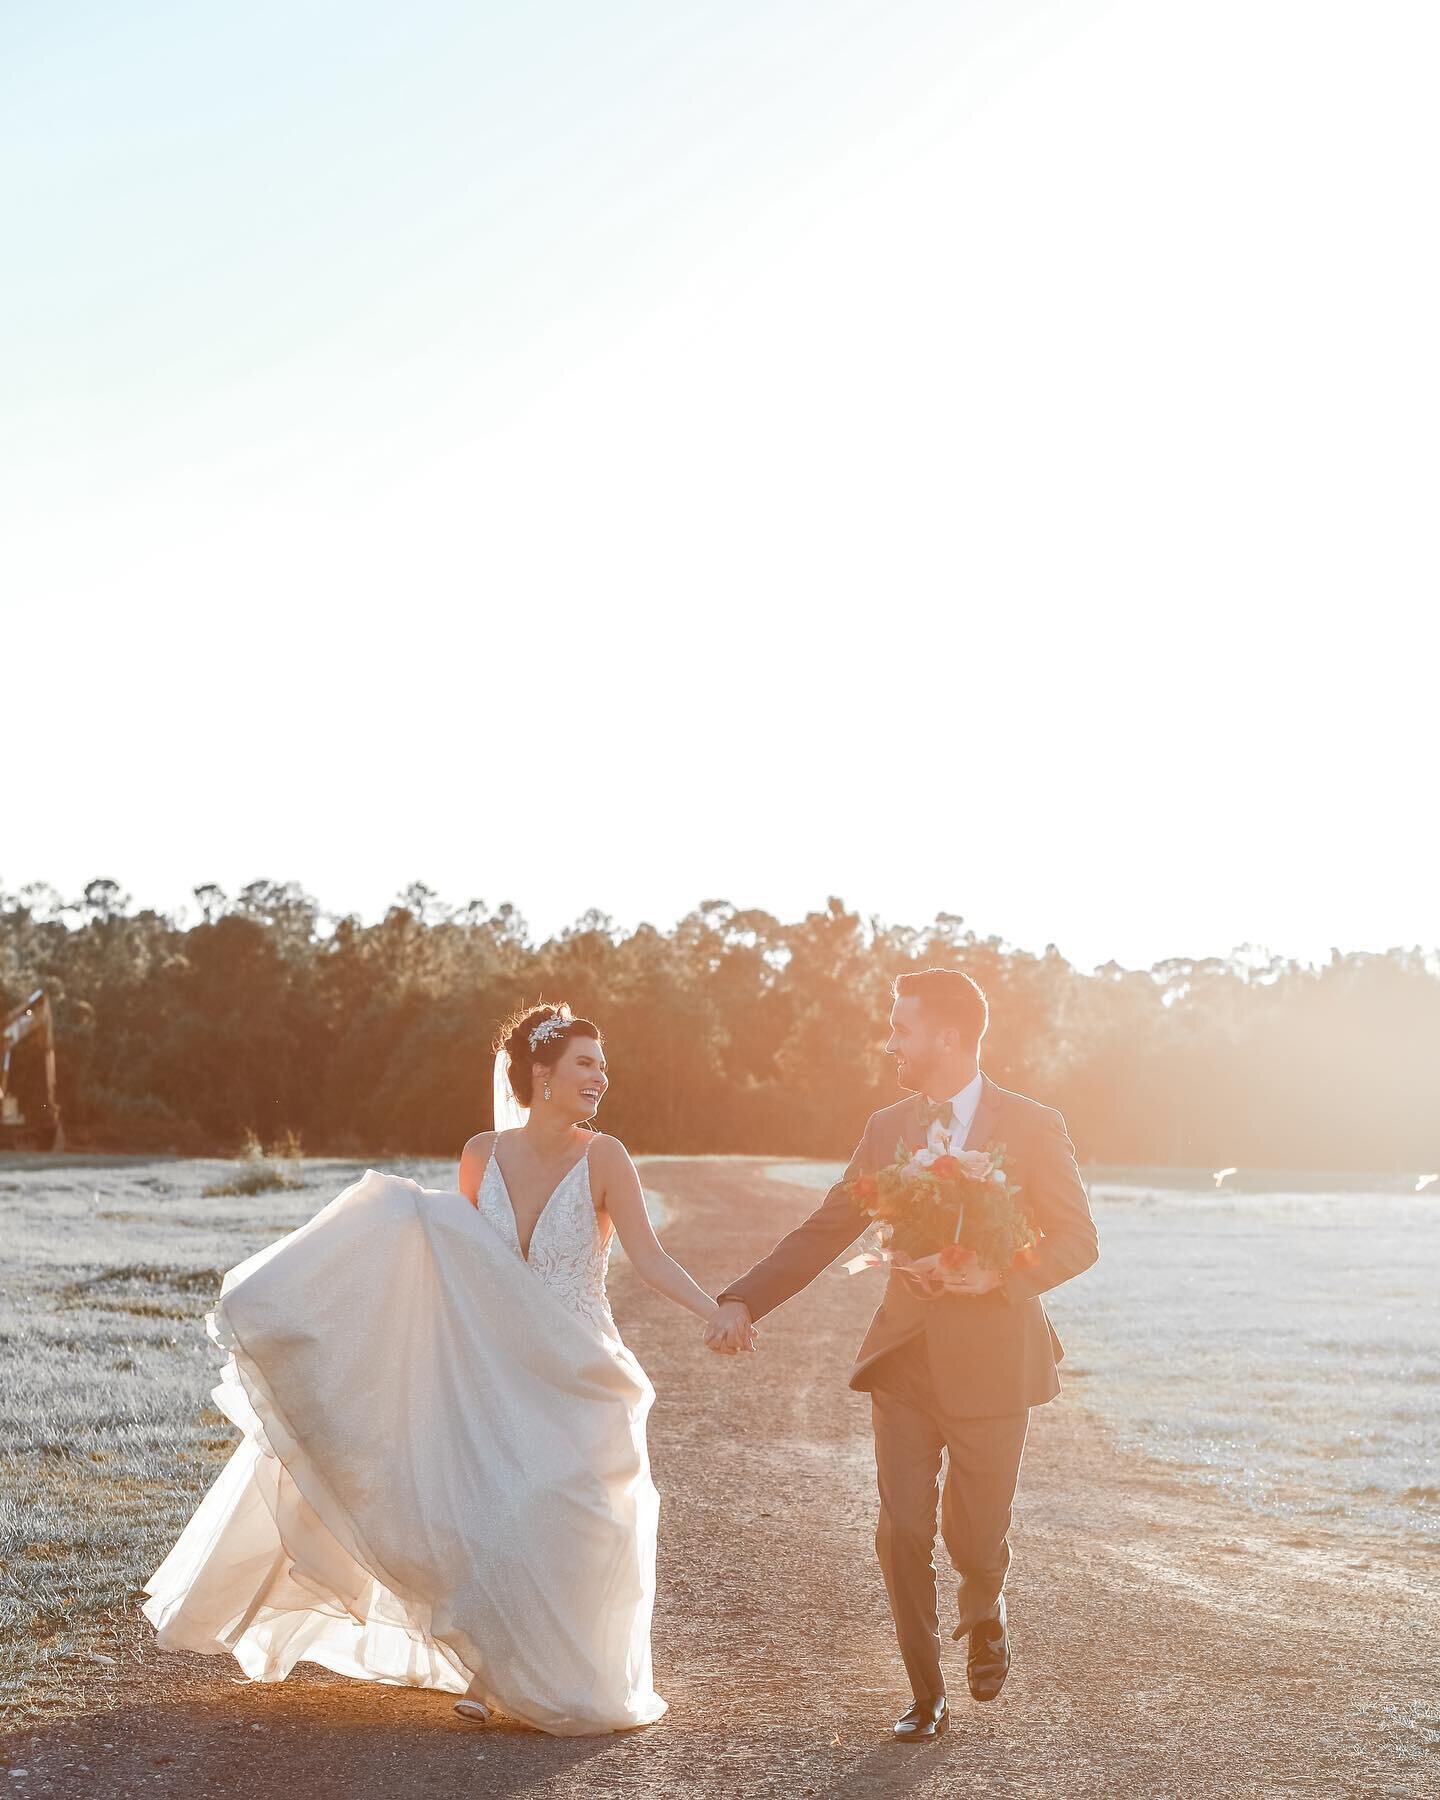 Running into forever with you 💫

Ready for a tour? Email us at hello@thepacking.house ☺️

Photography - @honeywood.photography
Planning &amp; Design - @theeventcompanyfl1
Floral Designer - @no1flowers
Gowns &amp; Bridal Jewelry - @lilysbridal
Tuxedo